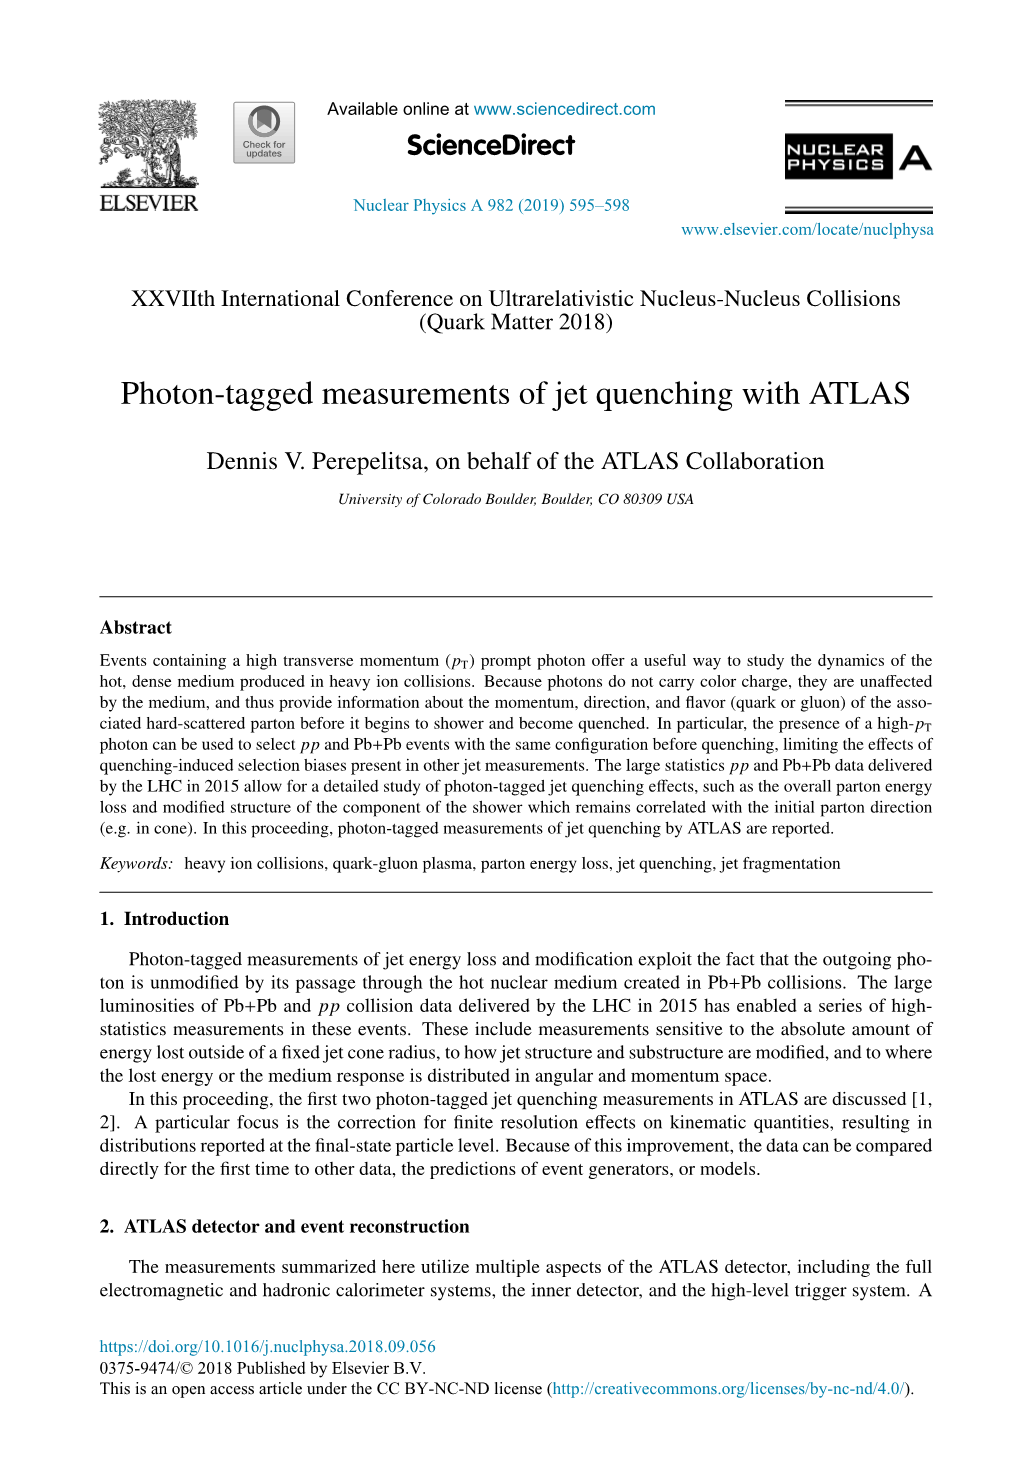 Photon-Tagged Measurements of Jet Quenching with ATLAS